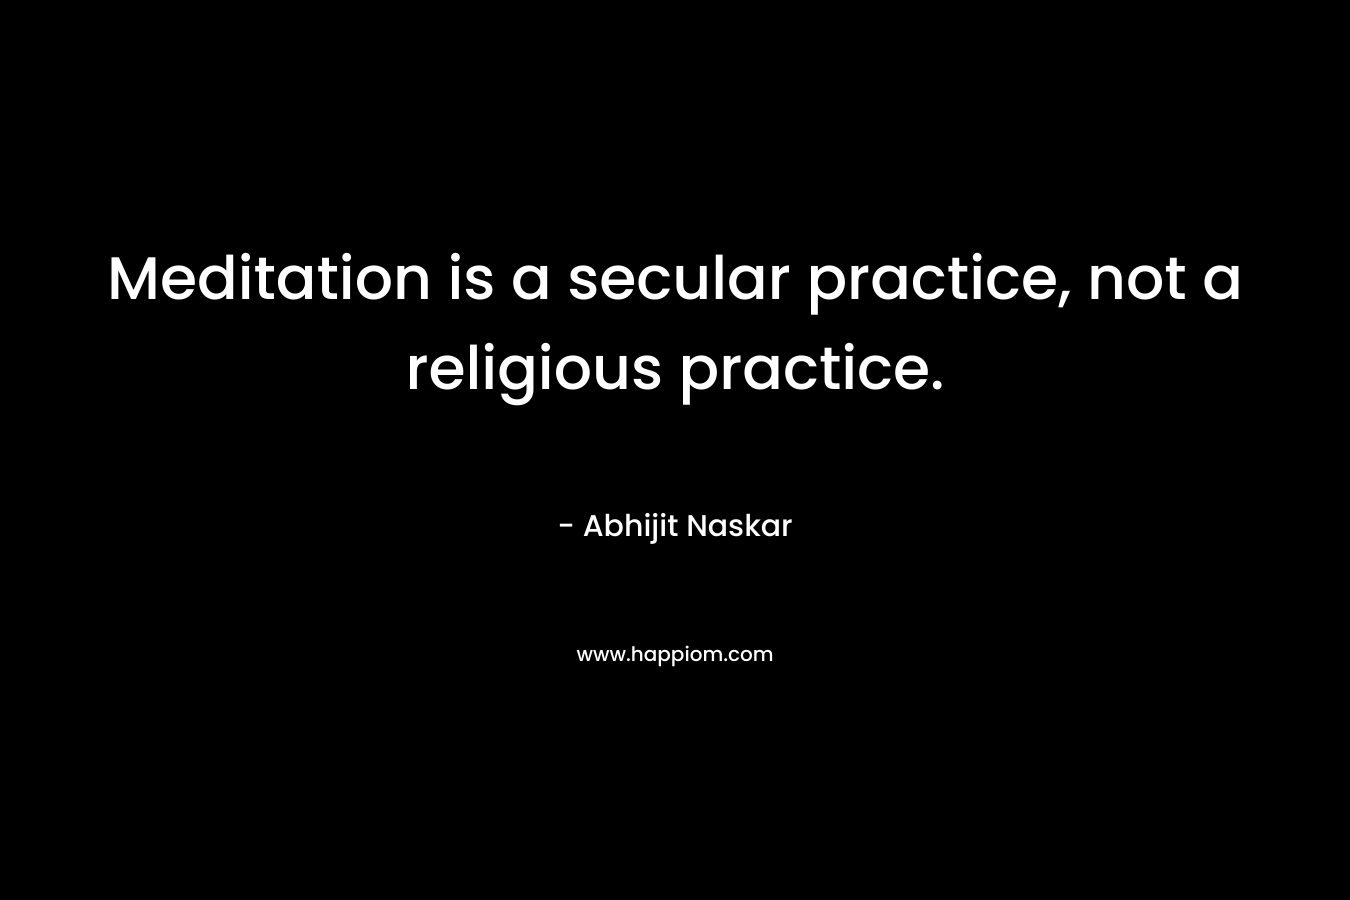 Meditation is a secular practice, not a religious practice.